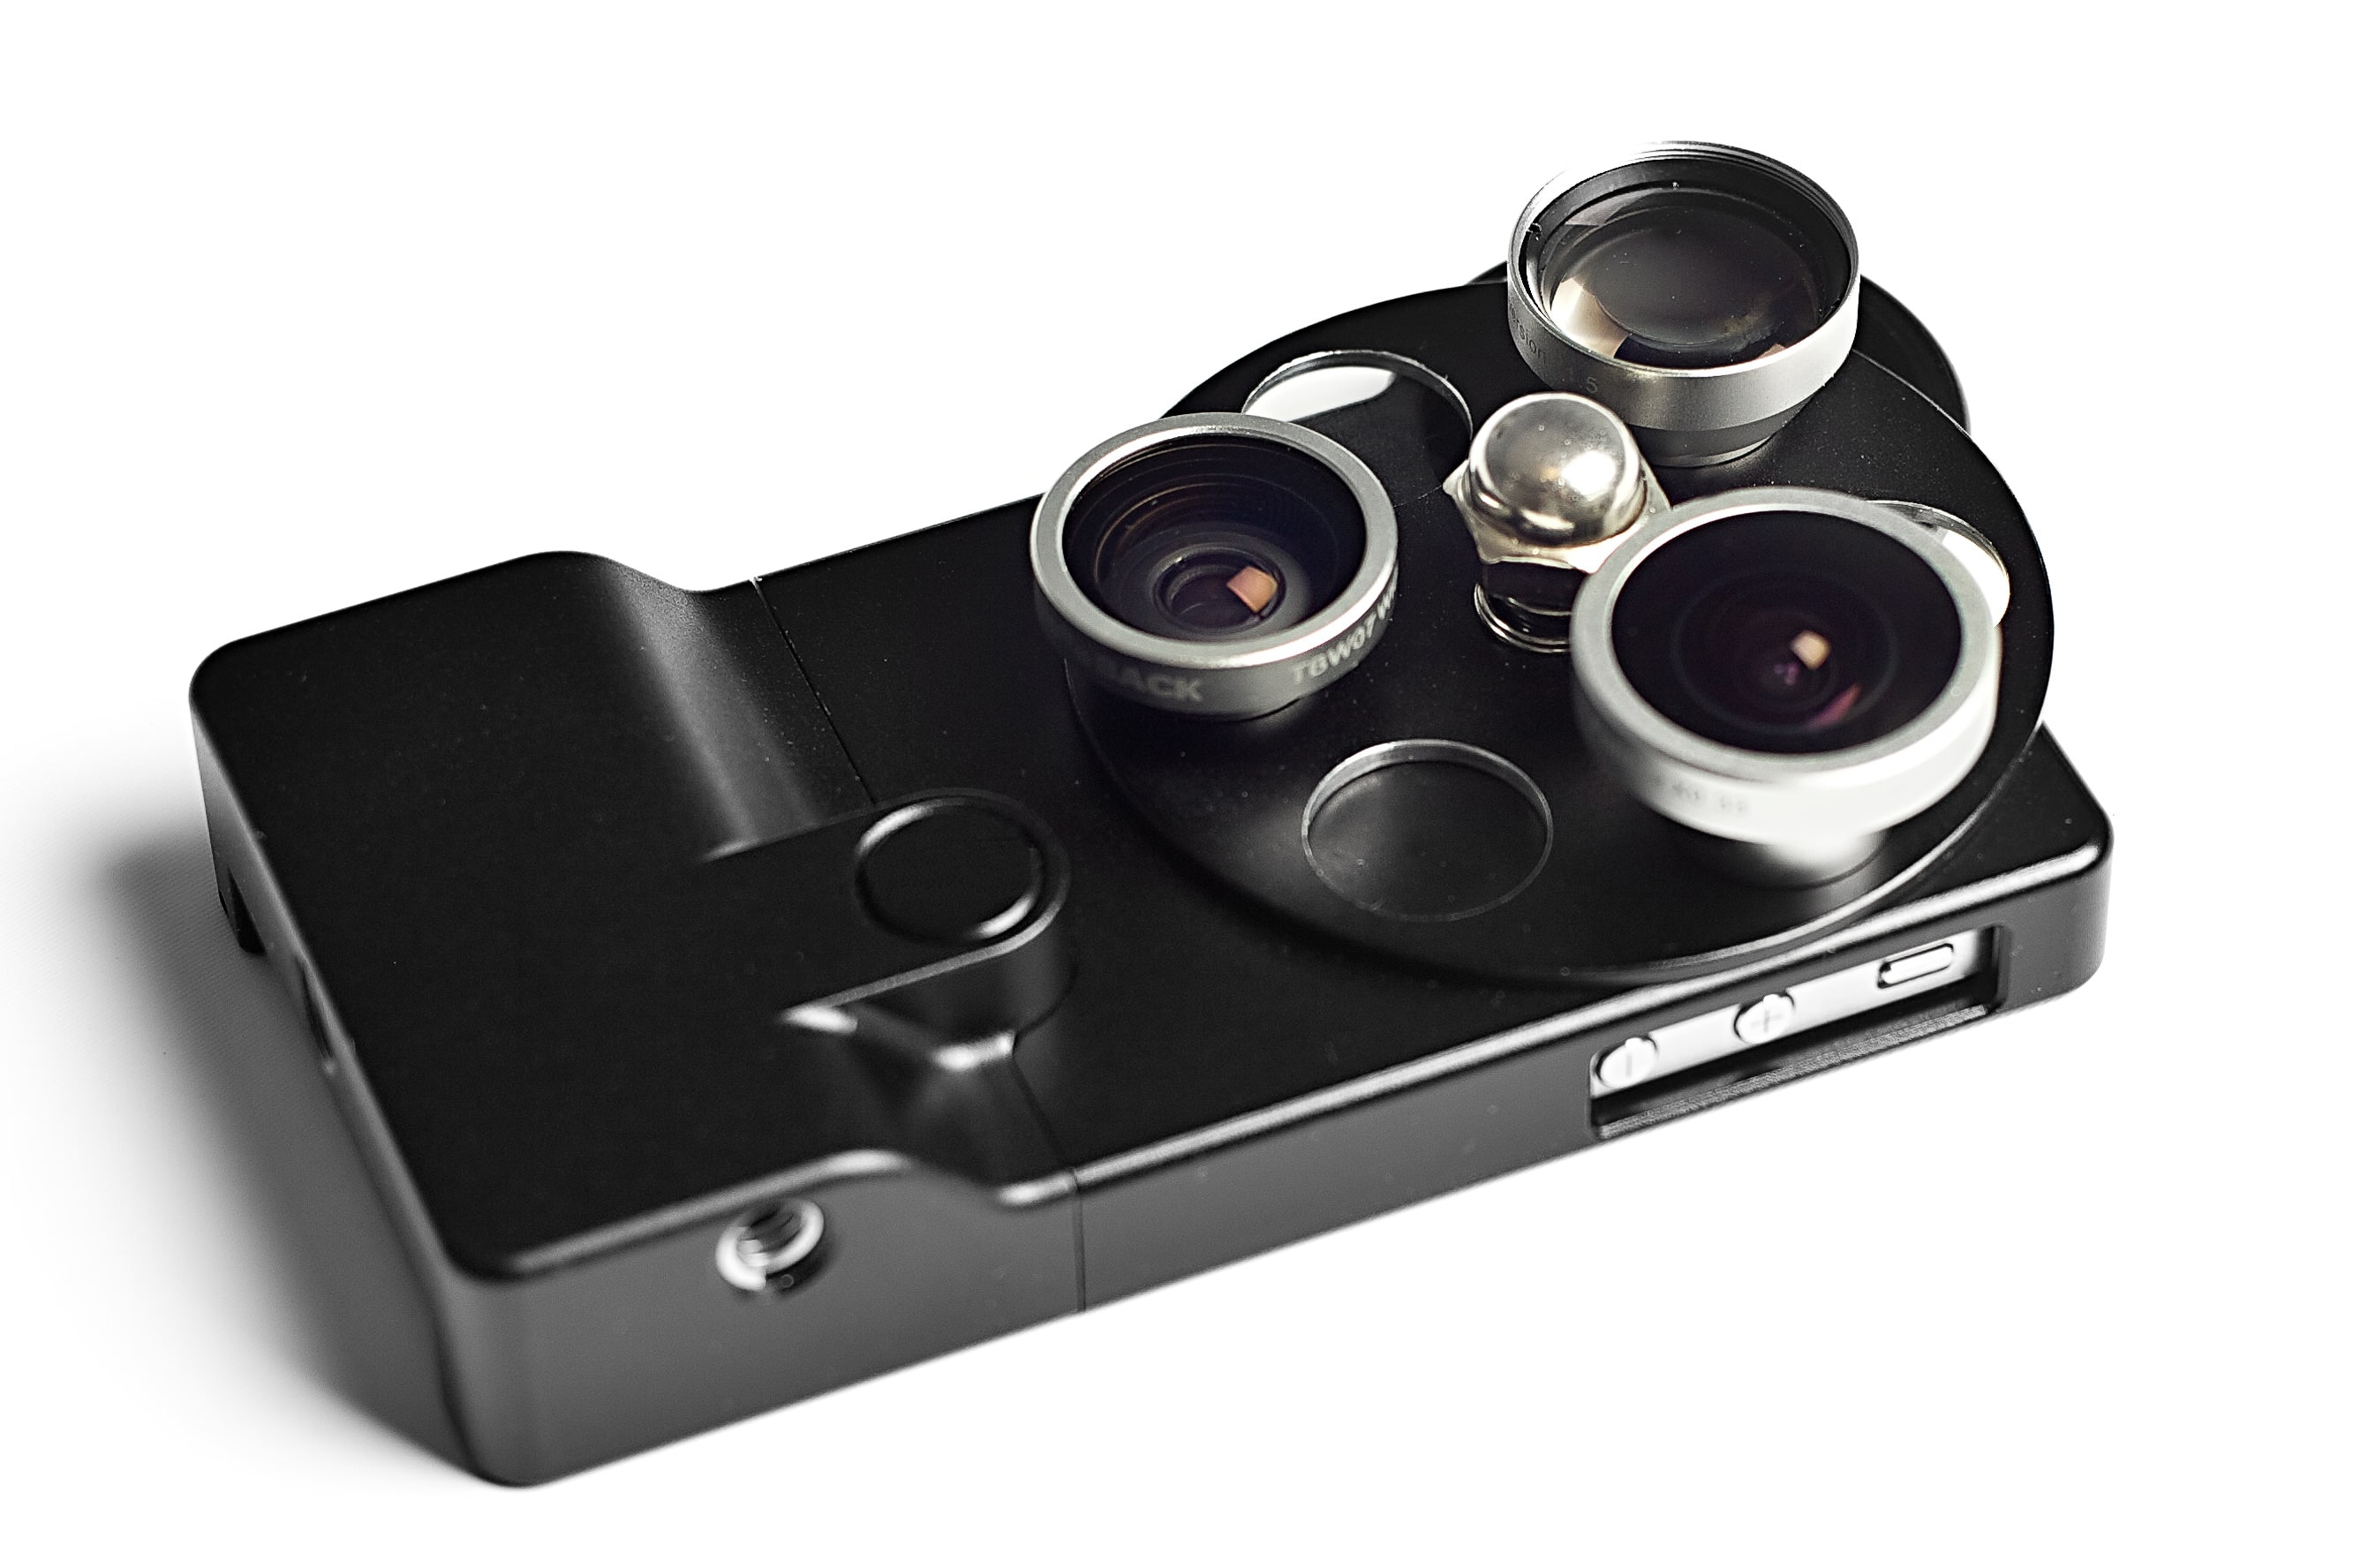 appetit Uddybe mikrofon Lens Dial: Professional Photography Accessory For Your iPhone 4S | Bit  Rebels